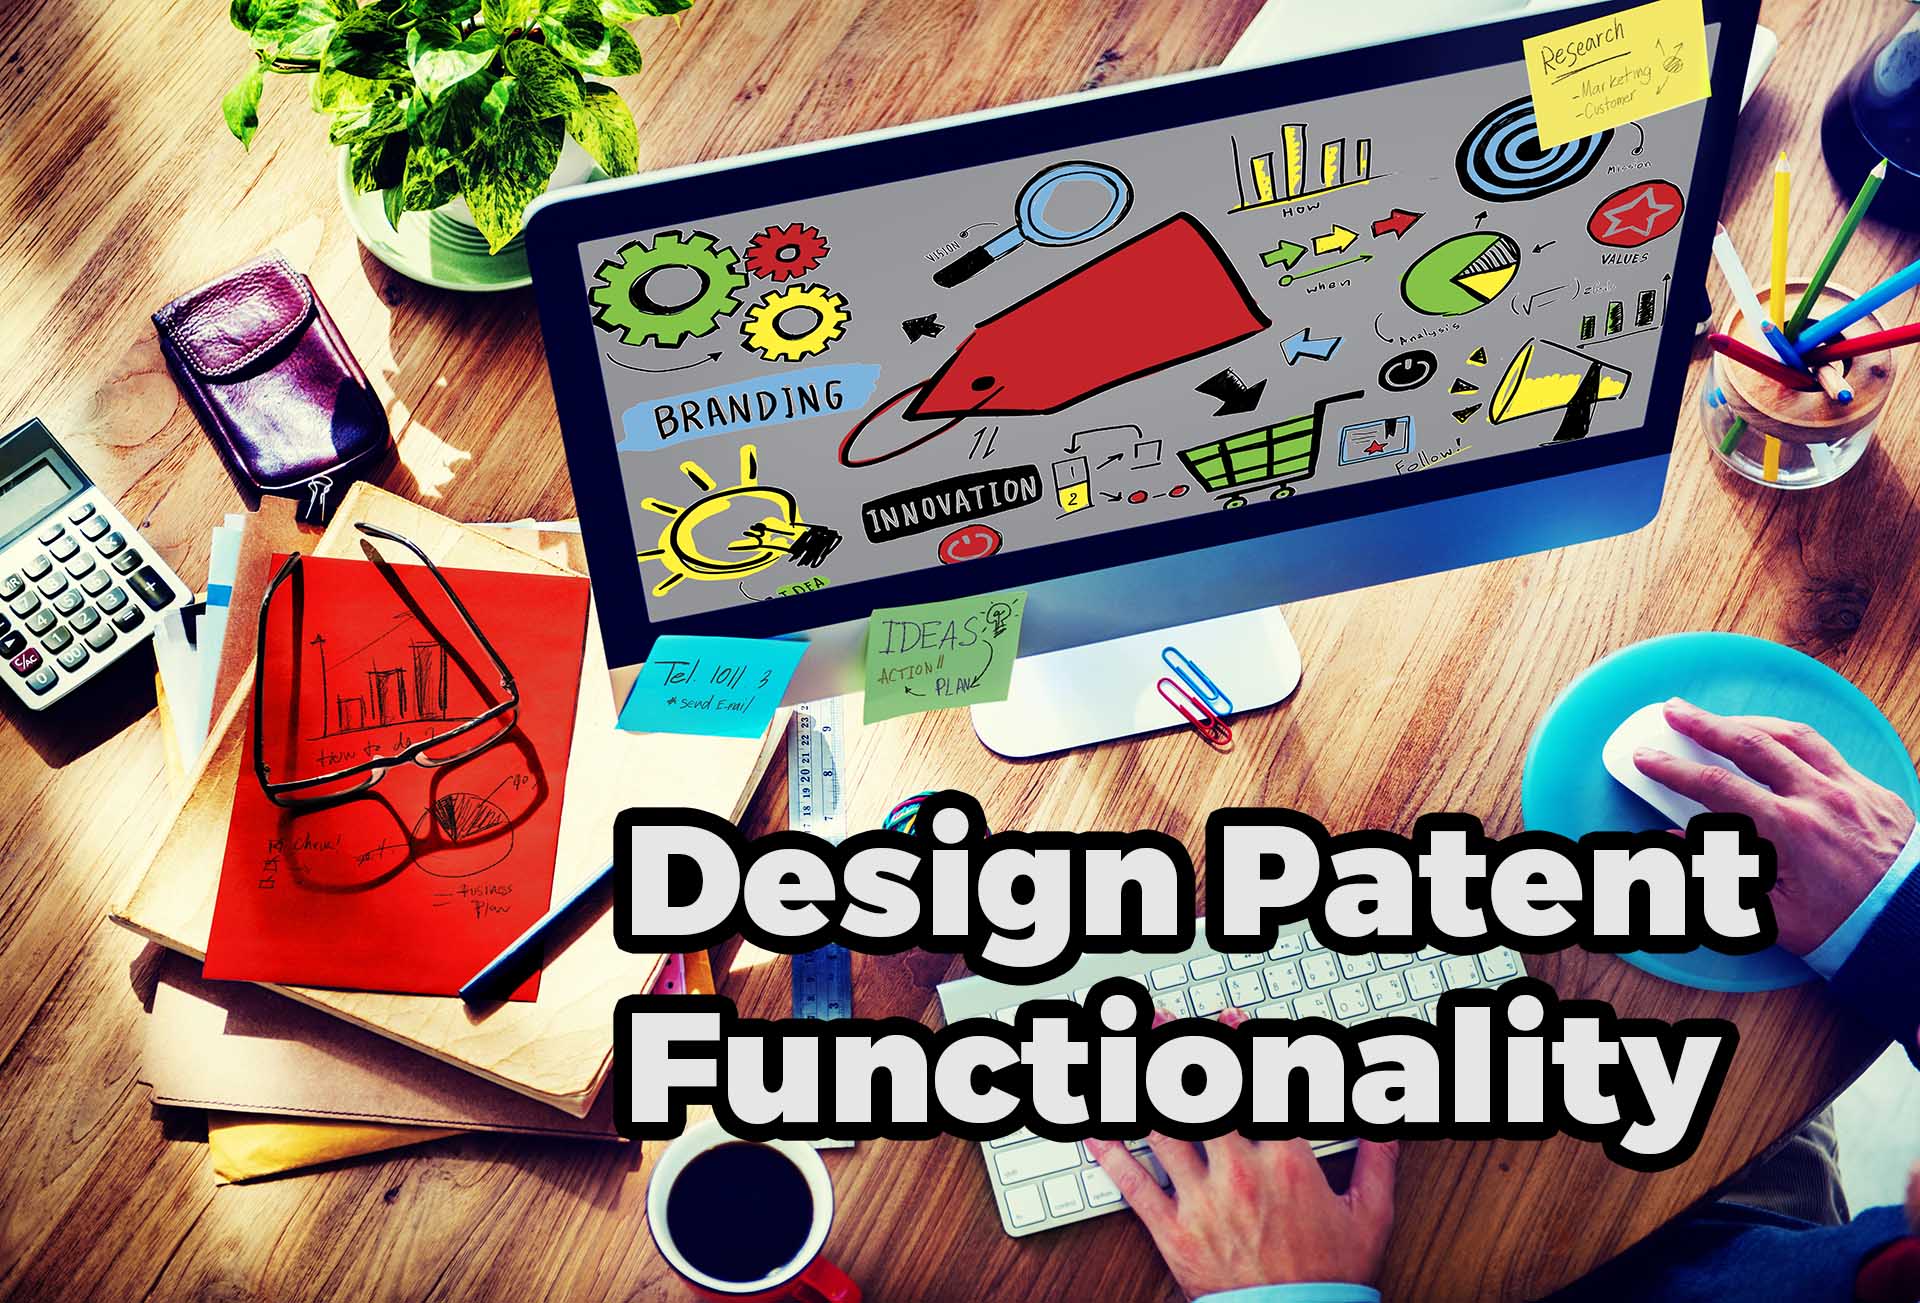 Design patent functionality